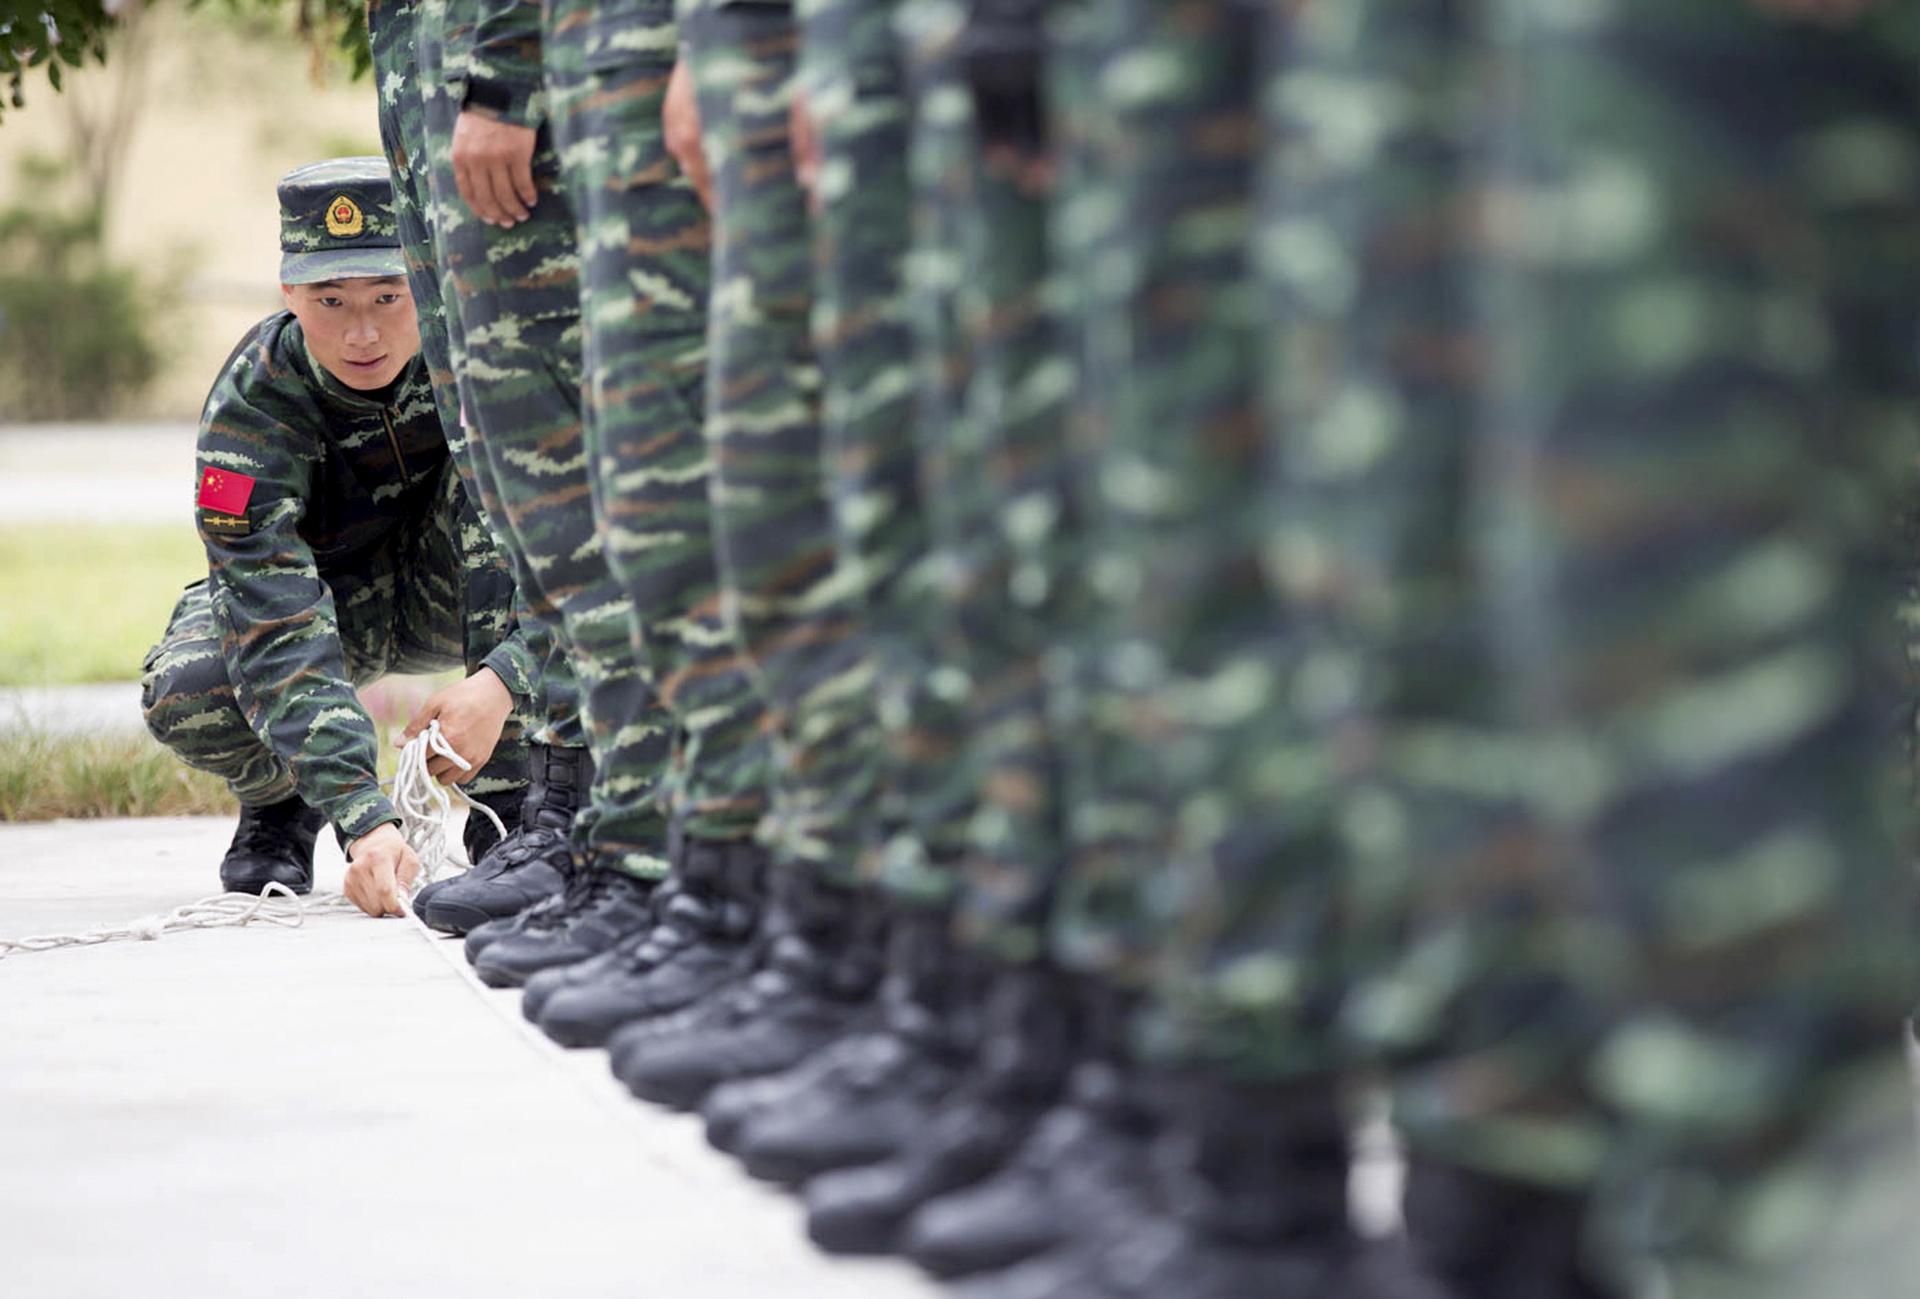 A soldier from China's People's Liberation Army uses a rope to line up other soldiers during a training session for a military parade to mark the 70th anniversary of the end of World War Two, at a military base in Beijing, China, September 1, 2015.